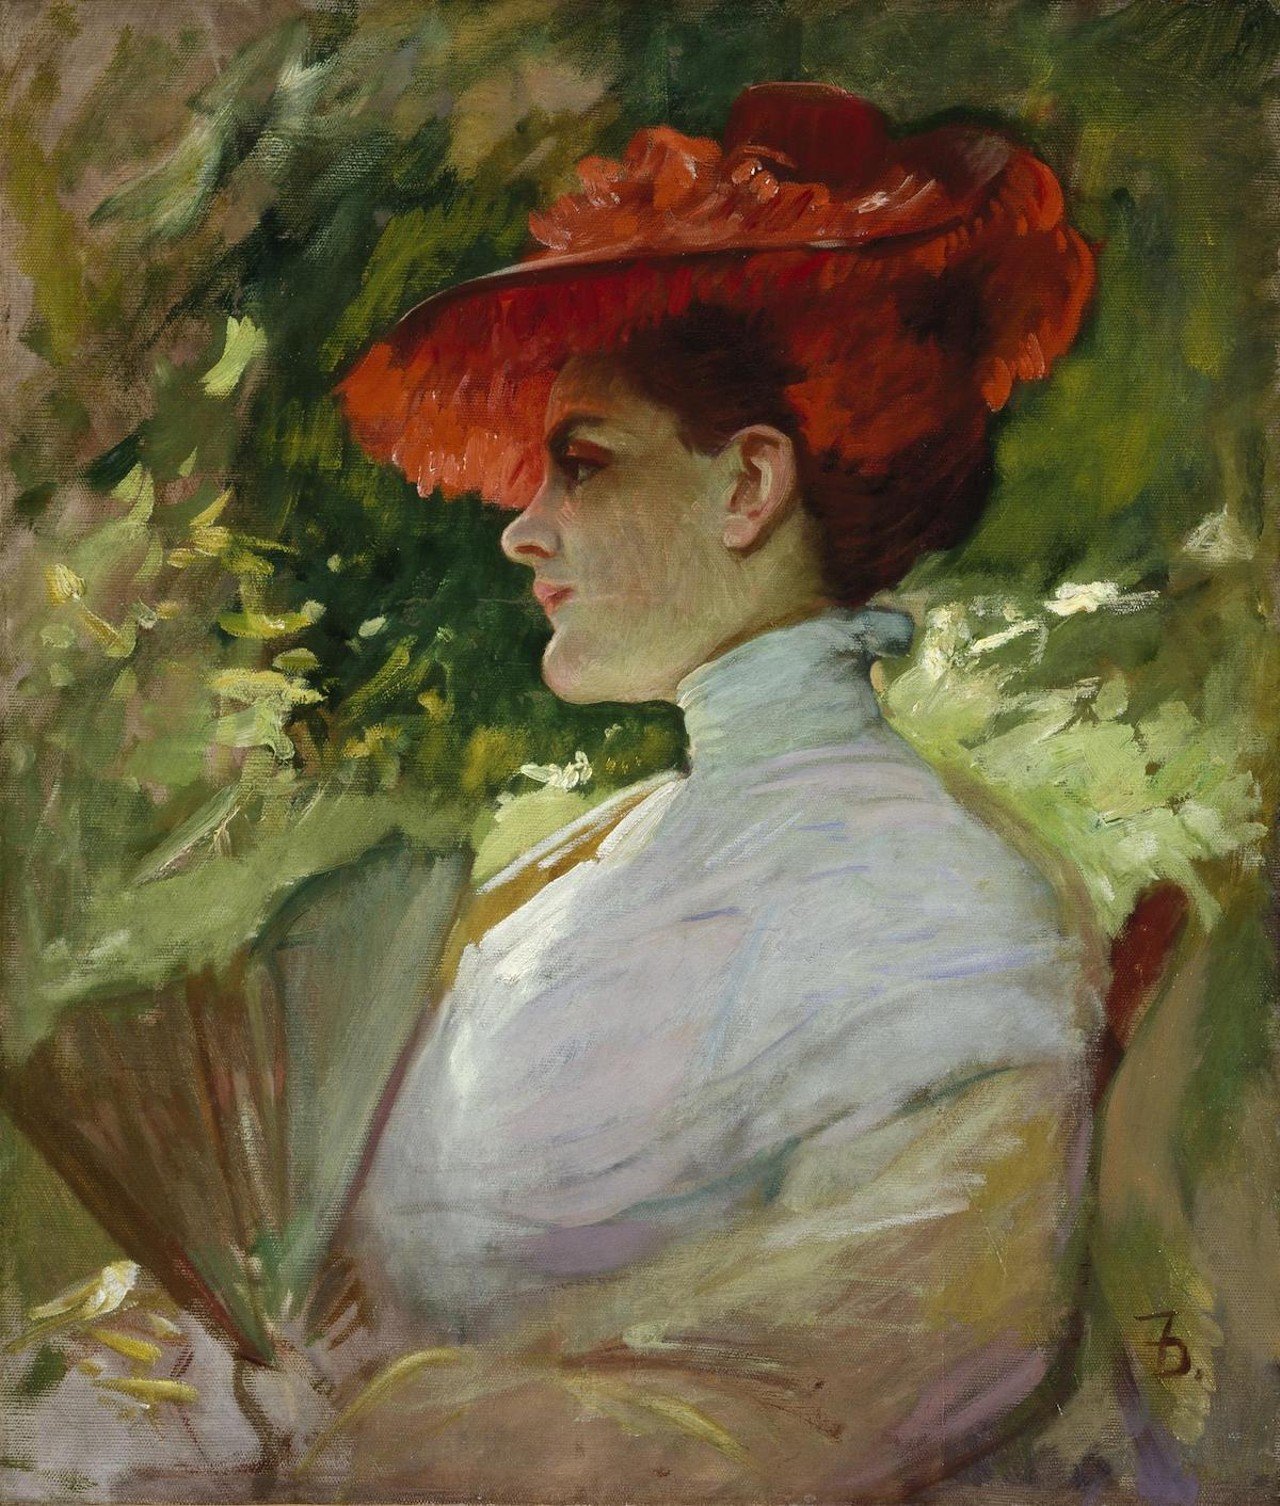 Covington
Artist Frank Duveneck painted this red Kentucky Derby-esque hat, so we're using it to pay homage to his hometown of Covington. While this technically isn’t a Derby hat, we could totally see Lady With a Red Hat, a.k.a. Maggie Wilson, wearing this to the Run for the Roses. Plus, in 1904 (the year this was painted), the winner of the Kentucky Derby, Elwood, was also the winner of the 1904 Latonia Derby – which happened right down the road from Duveneck’s hometown. Coincidence? Probably.